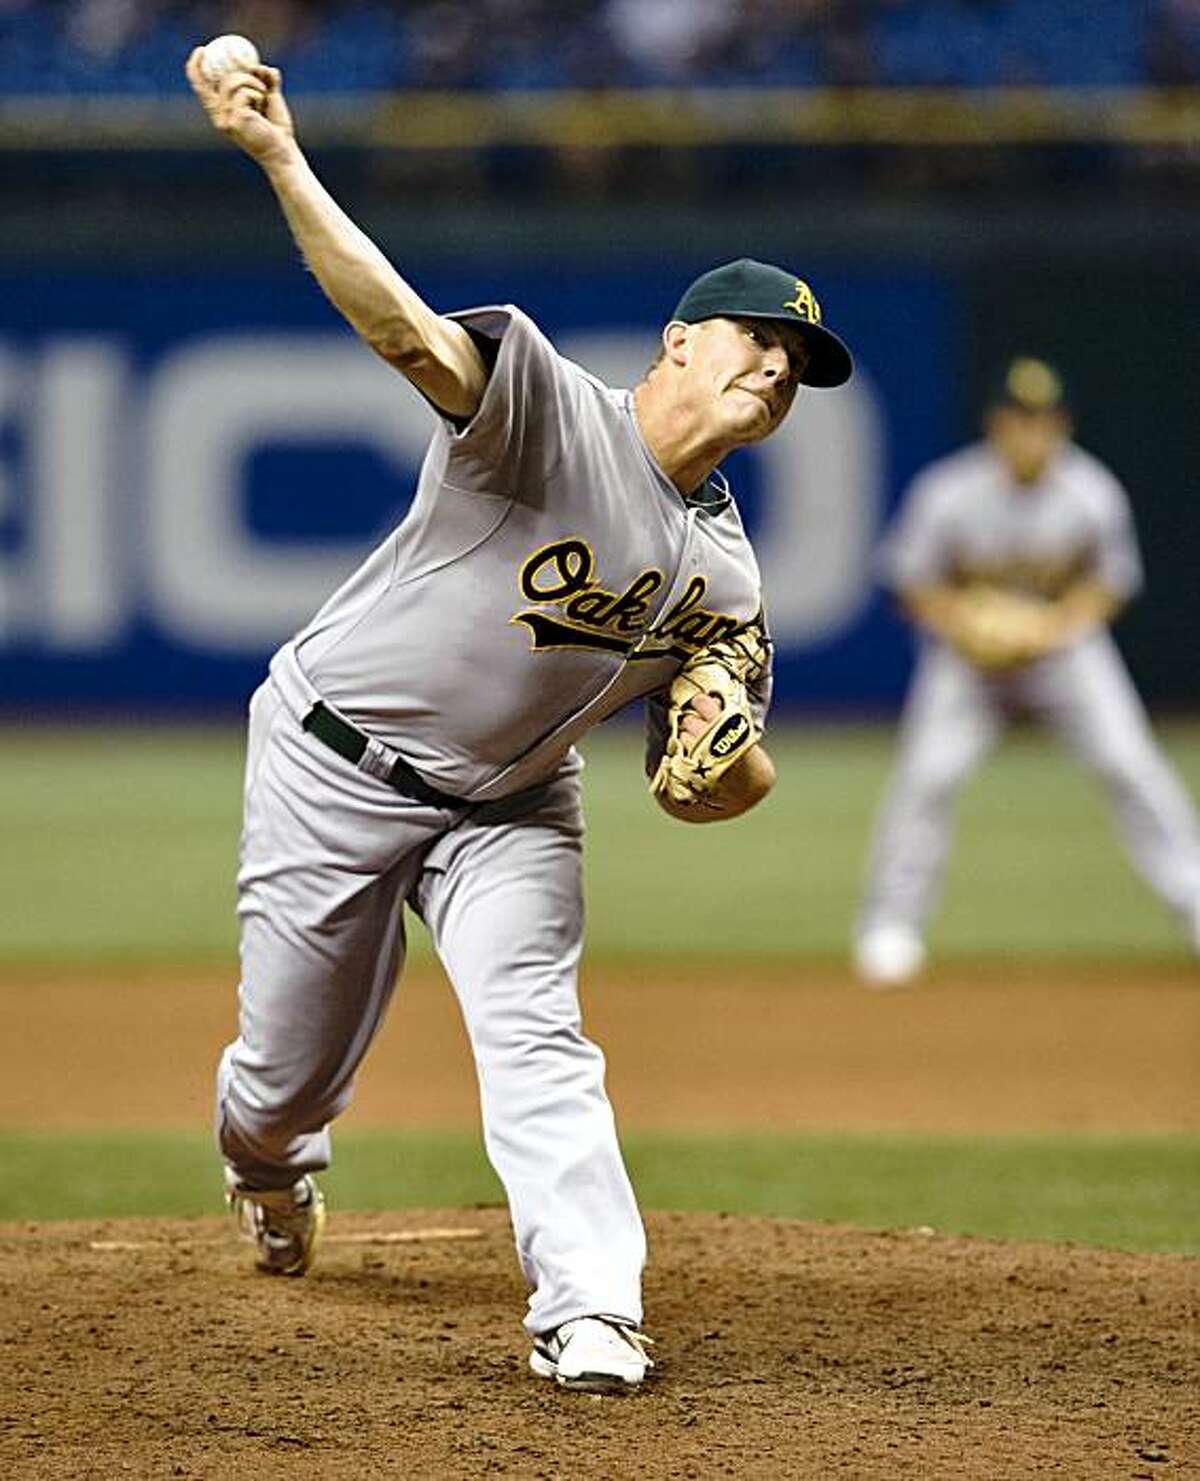 Andrew Bailey was an All-Star closer for the A's from 2009-2011. He is the Giants' new pitching coach.